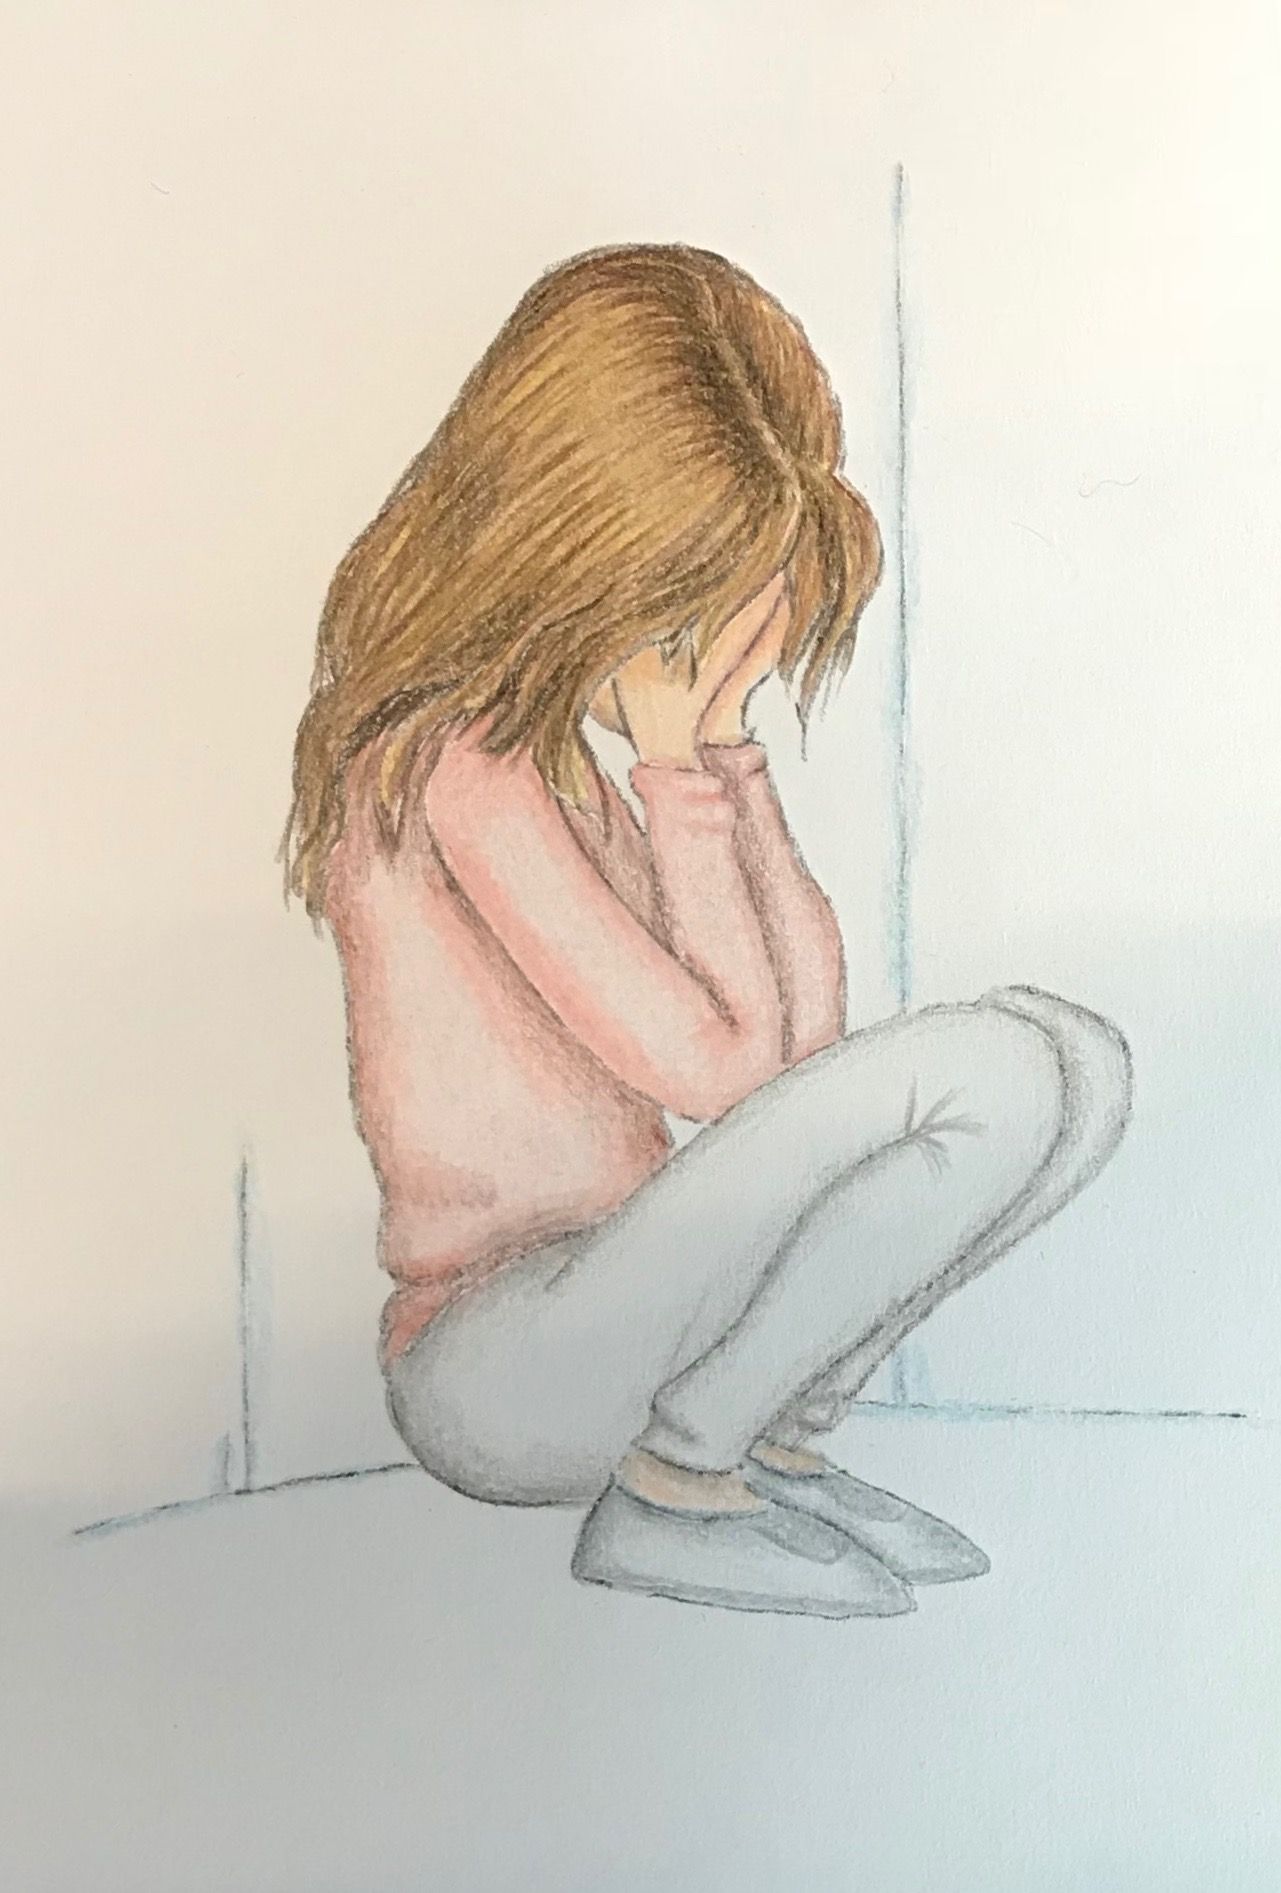 Depressed Girl Crying Girl Drawing Easy - 1281x1893 Wallpaper 